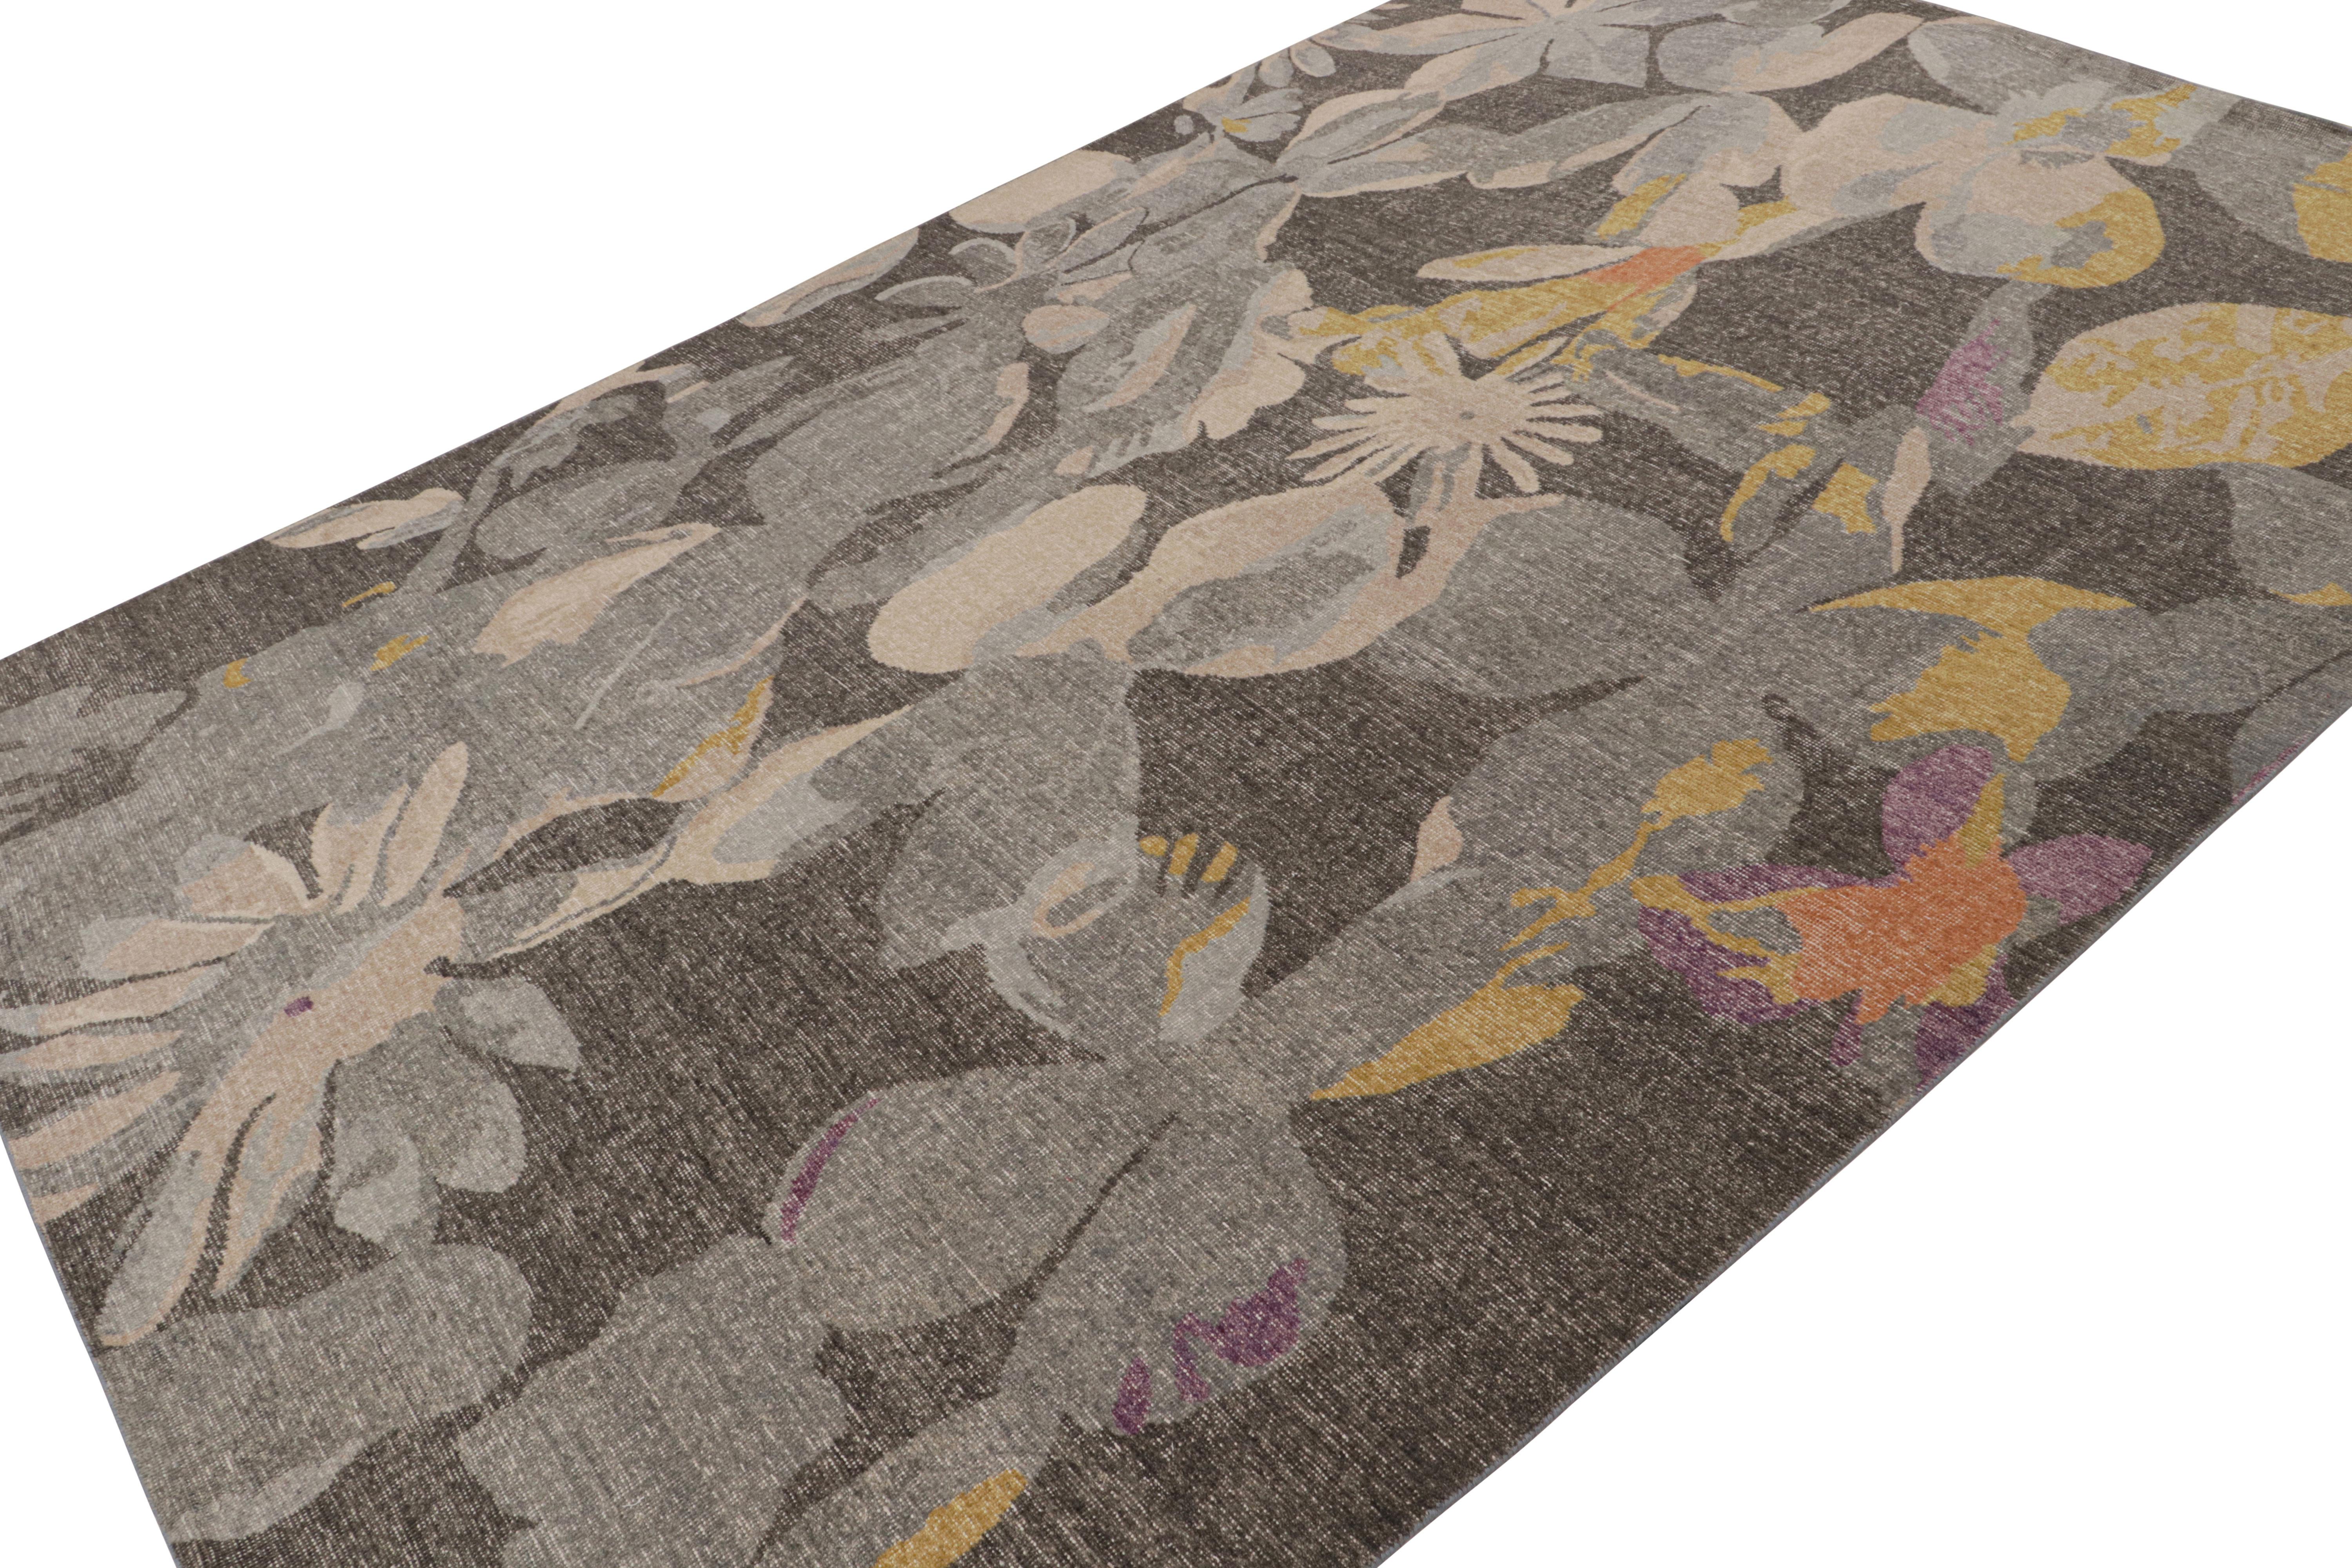 Inspired by botanical designs, this 9x12 modern rug is from Rug & Kilim’s Homage collection. Hand-knotted in wool.

On the Design:

In this contemporary design, gray, blue and gold tones underscore large-scale floral patterns. Connoisseurs may